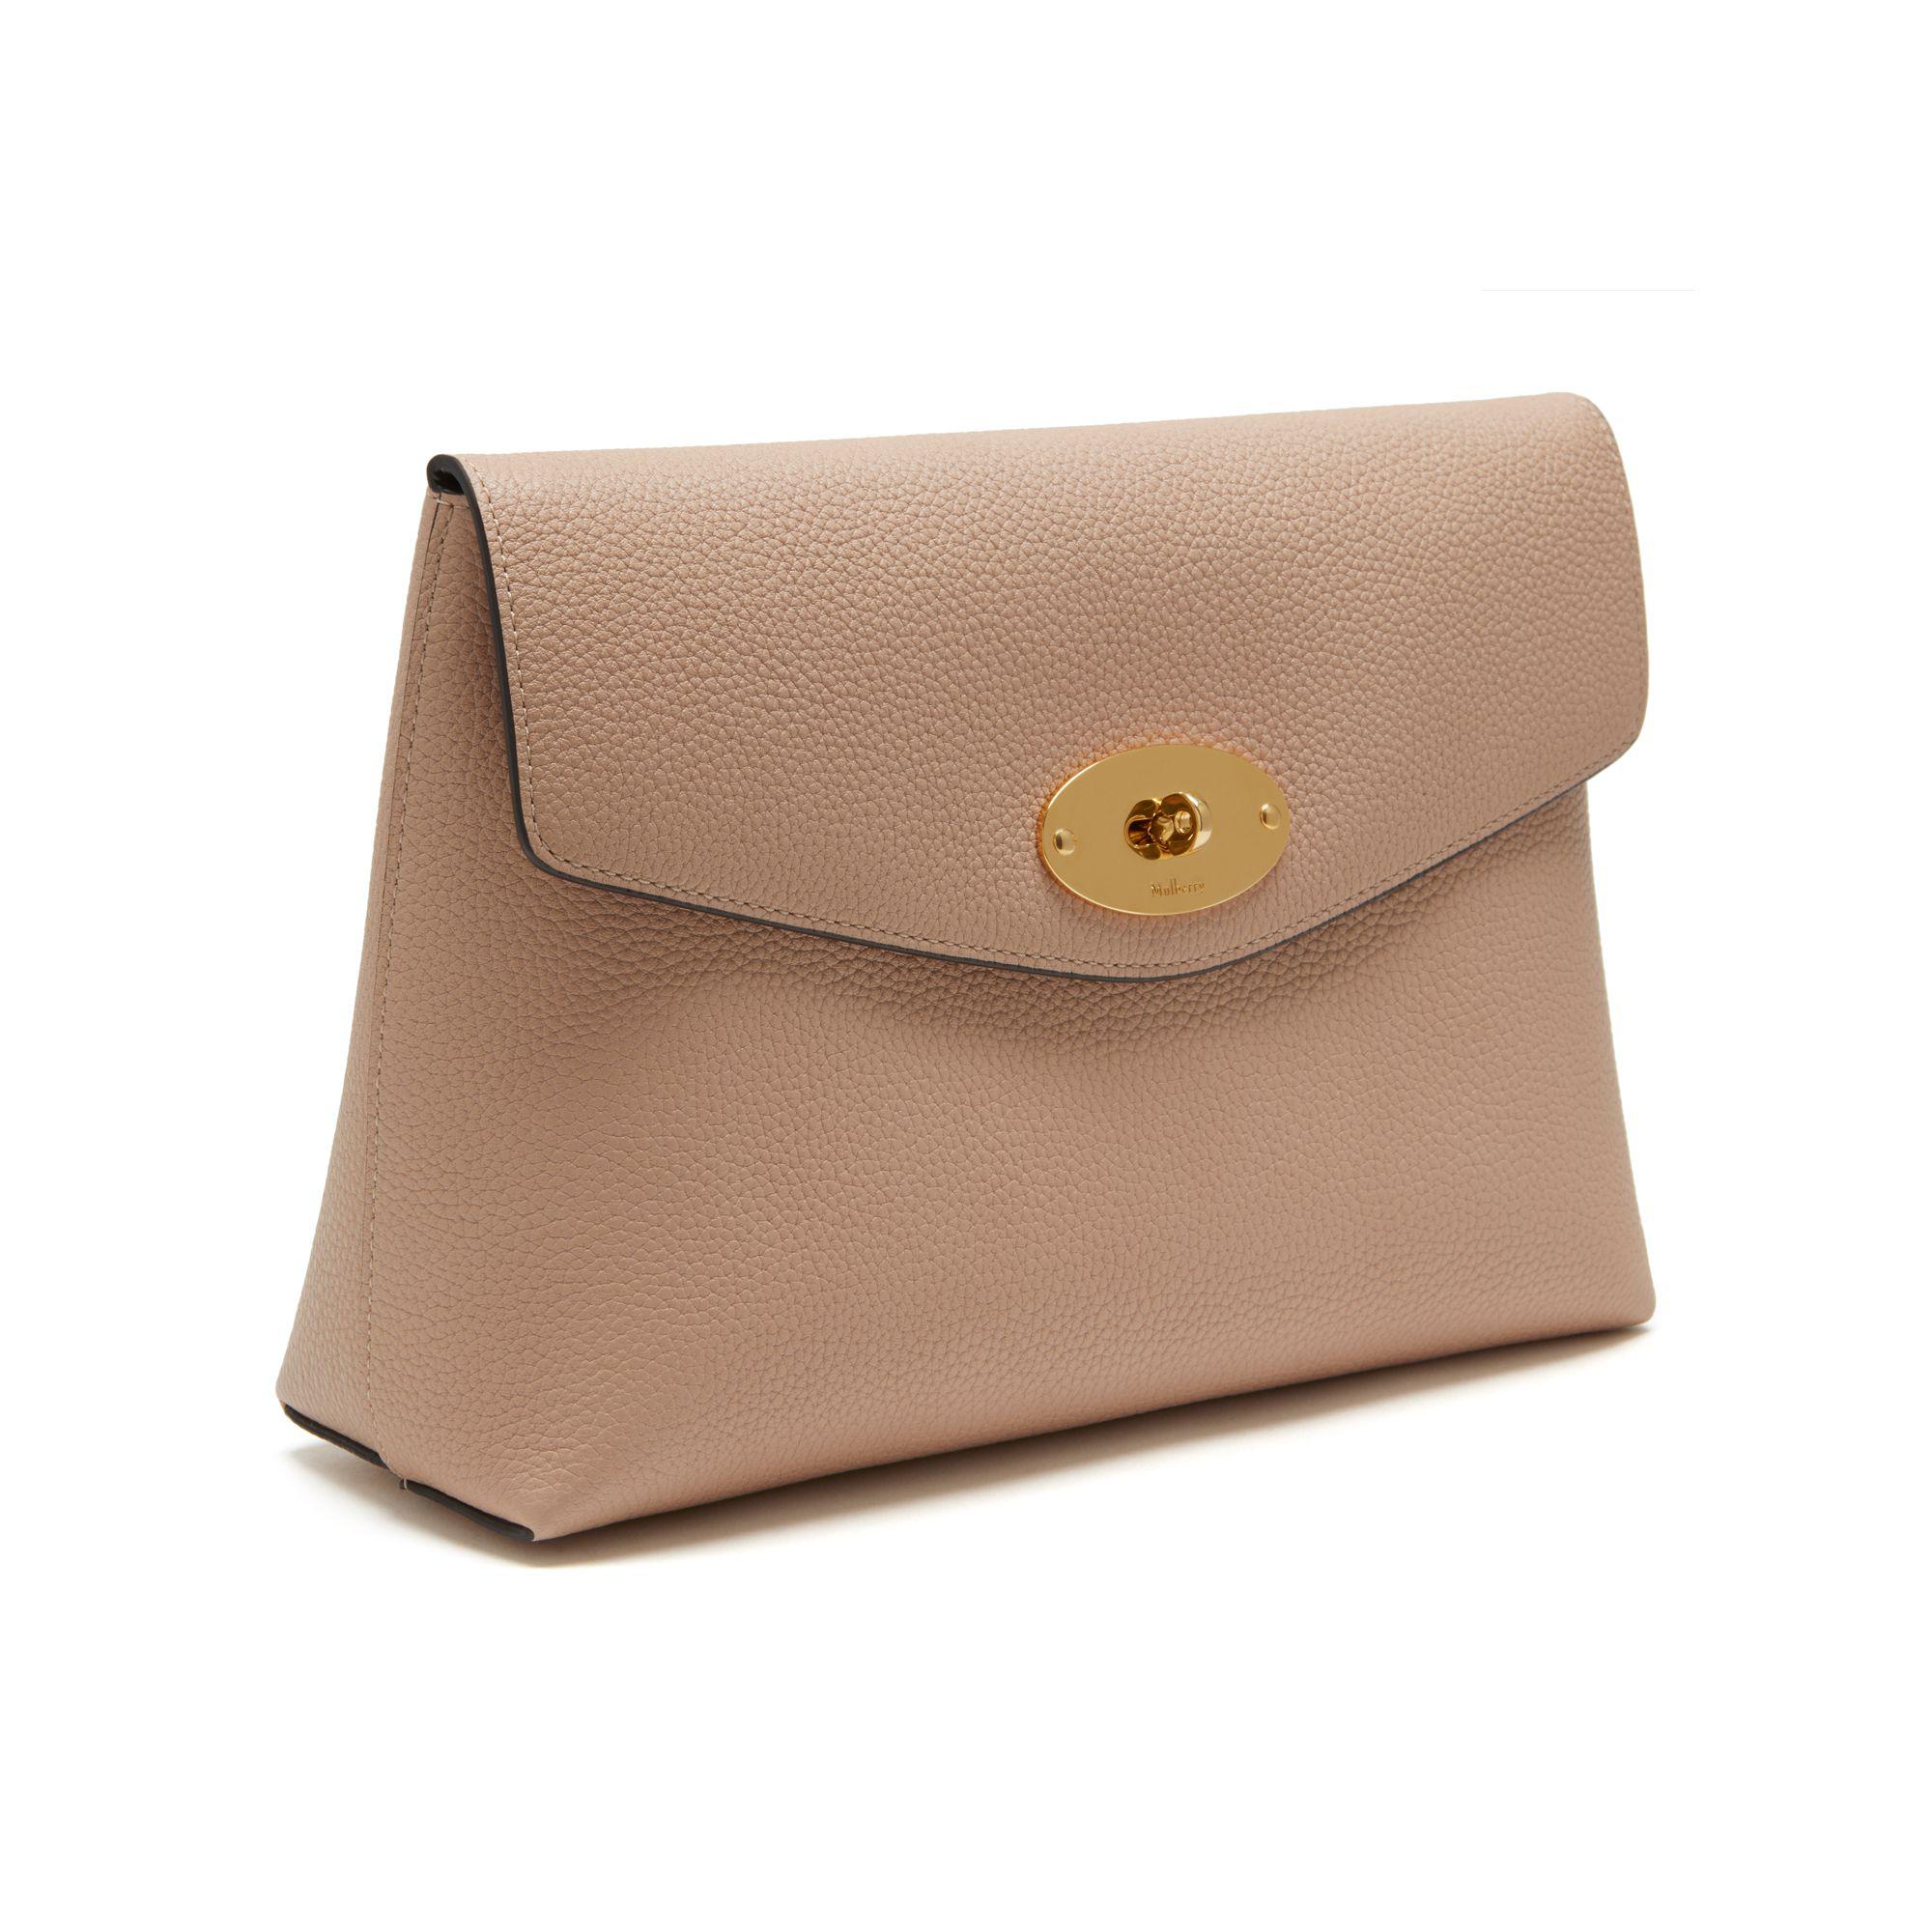 Mulberry Large Darley Cosmetic Pouch | Lyst